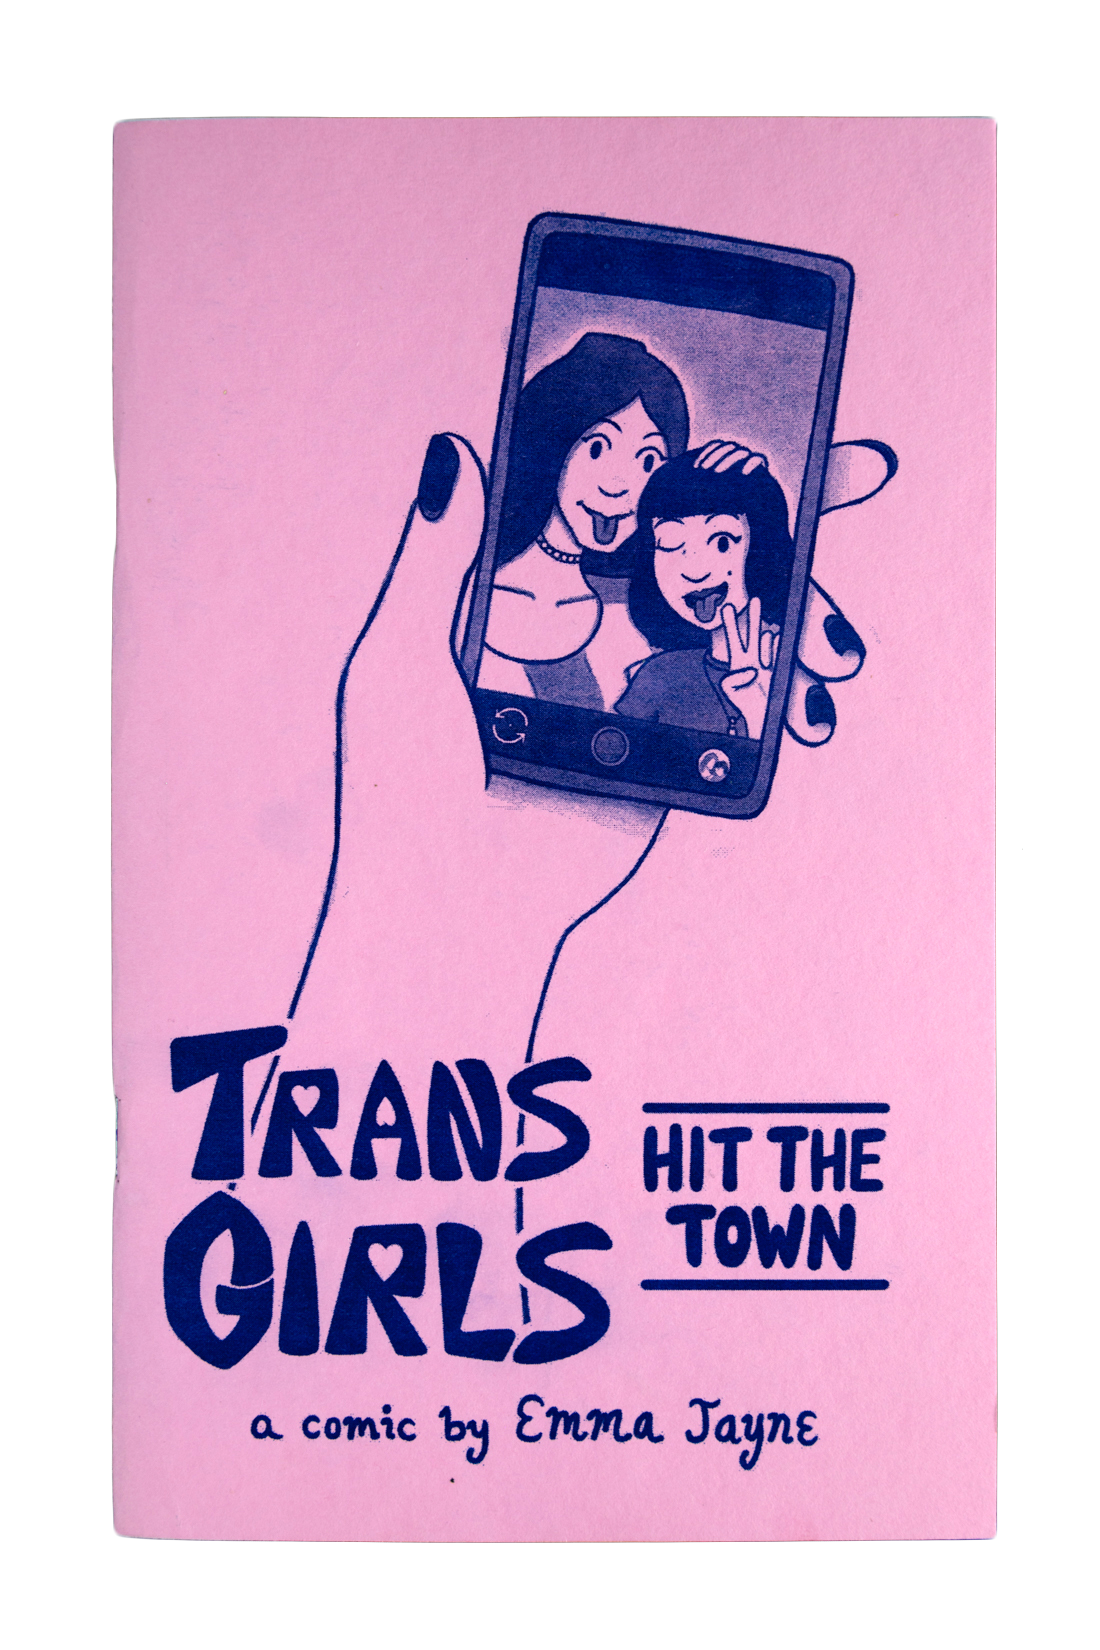 50 queer comics: Trans Girls Hit the Town